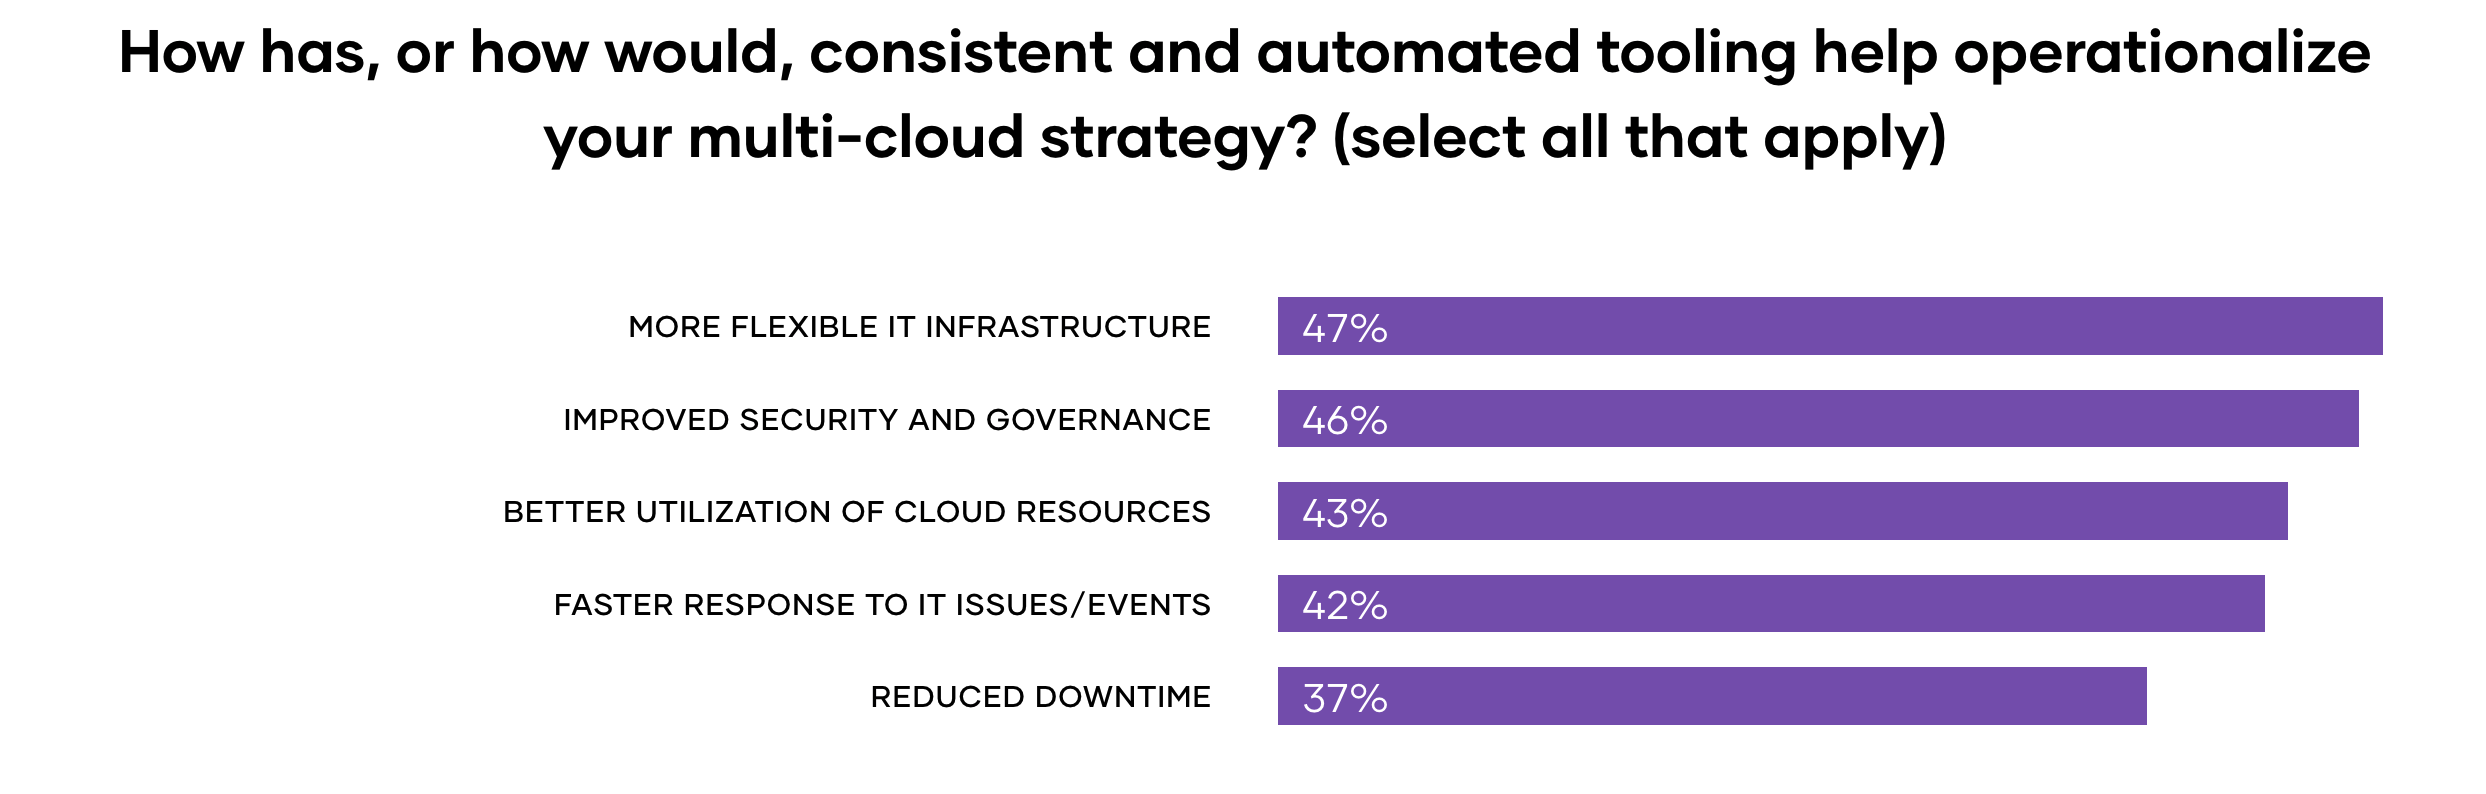 How does automated tooling help your multi-cloud strategy?